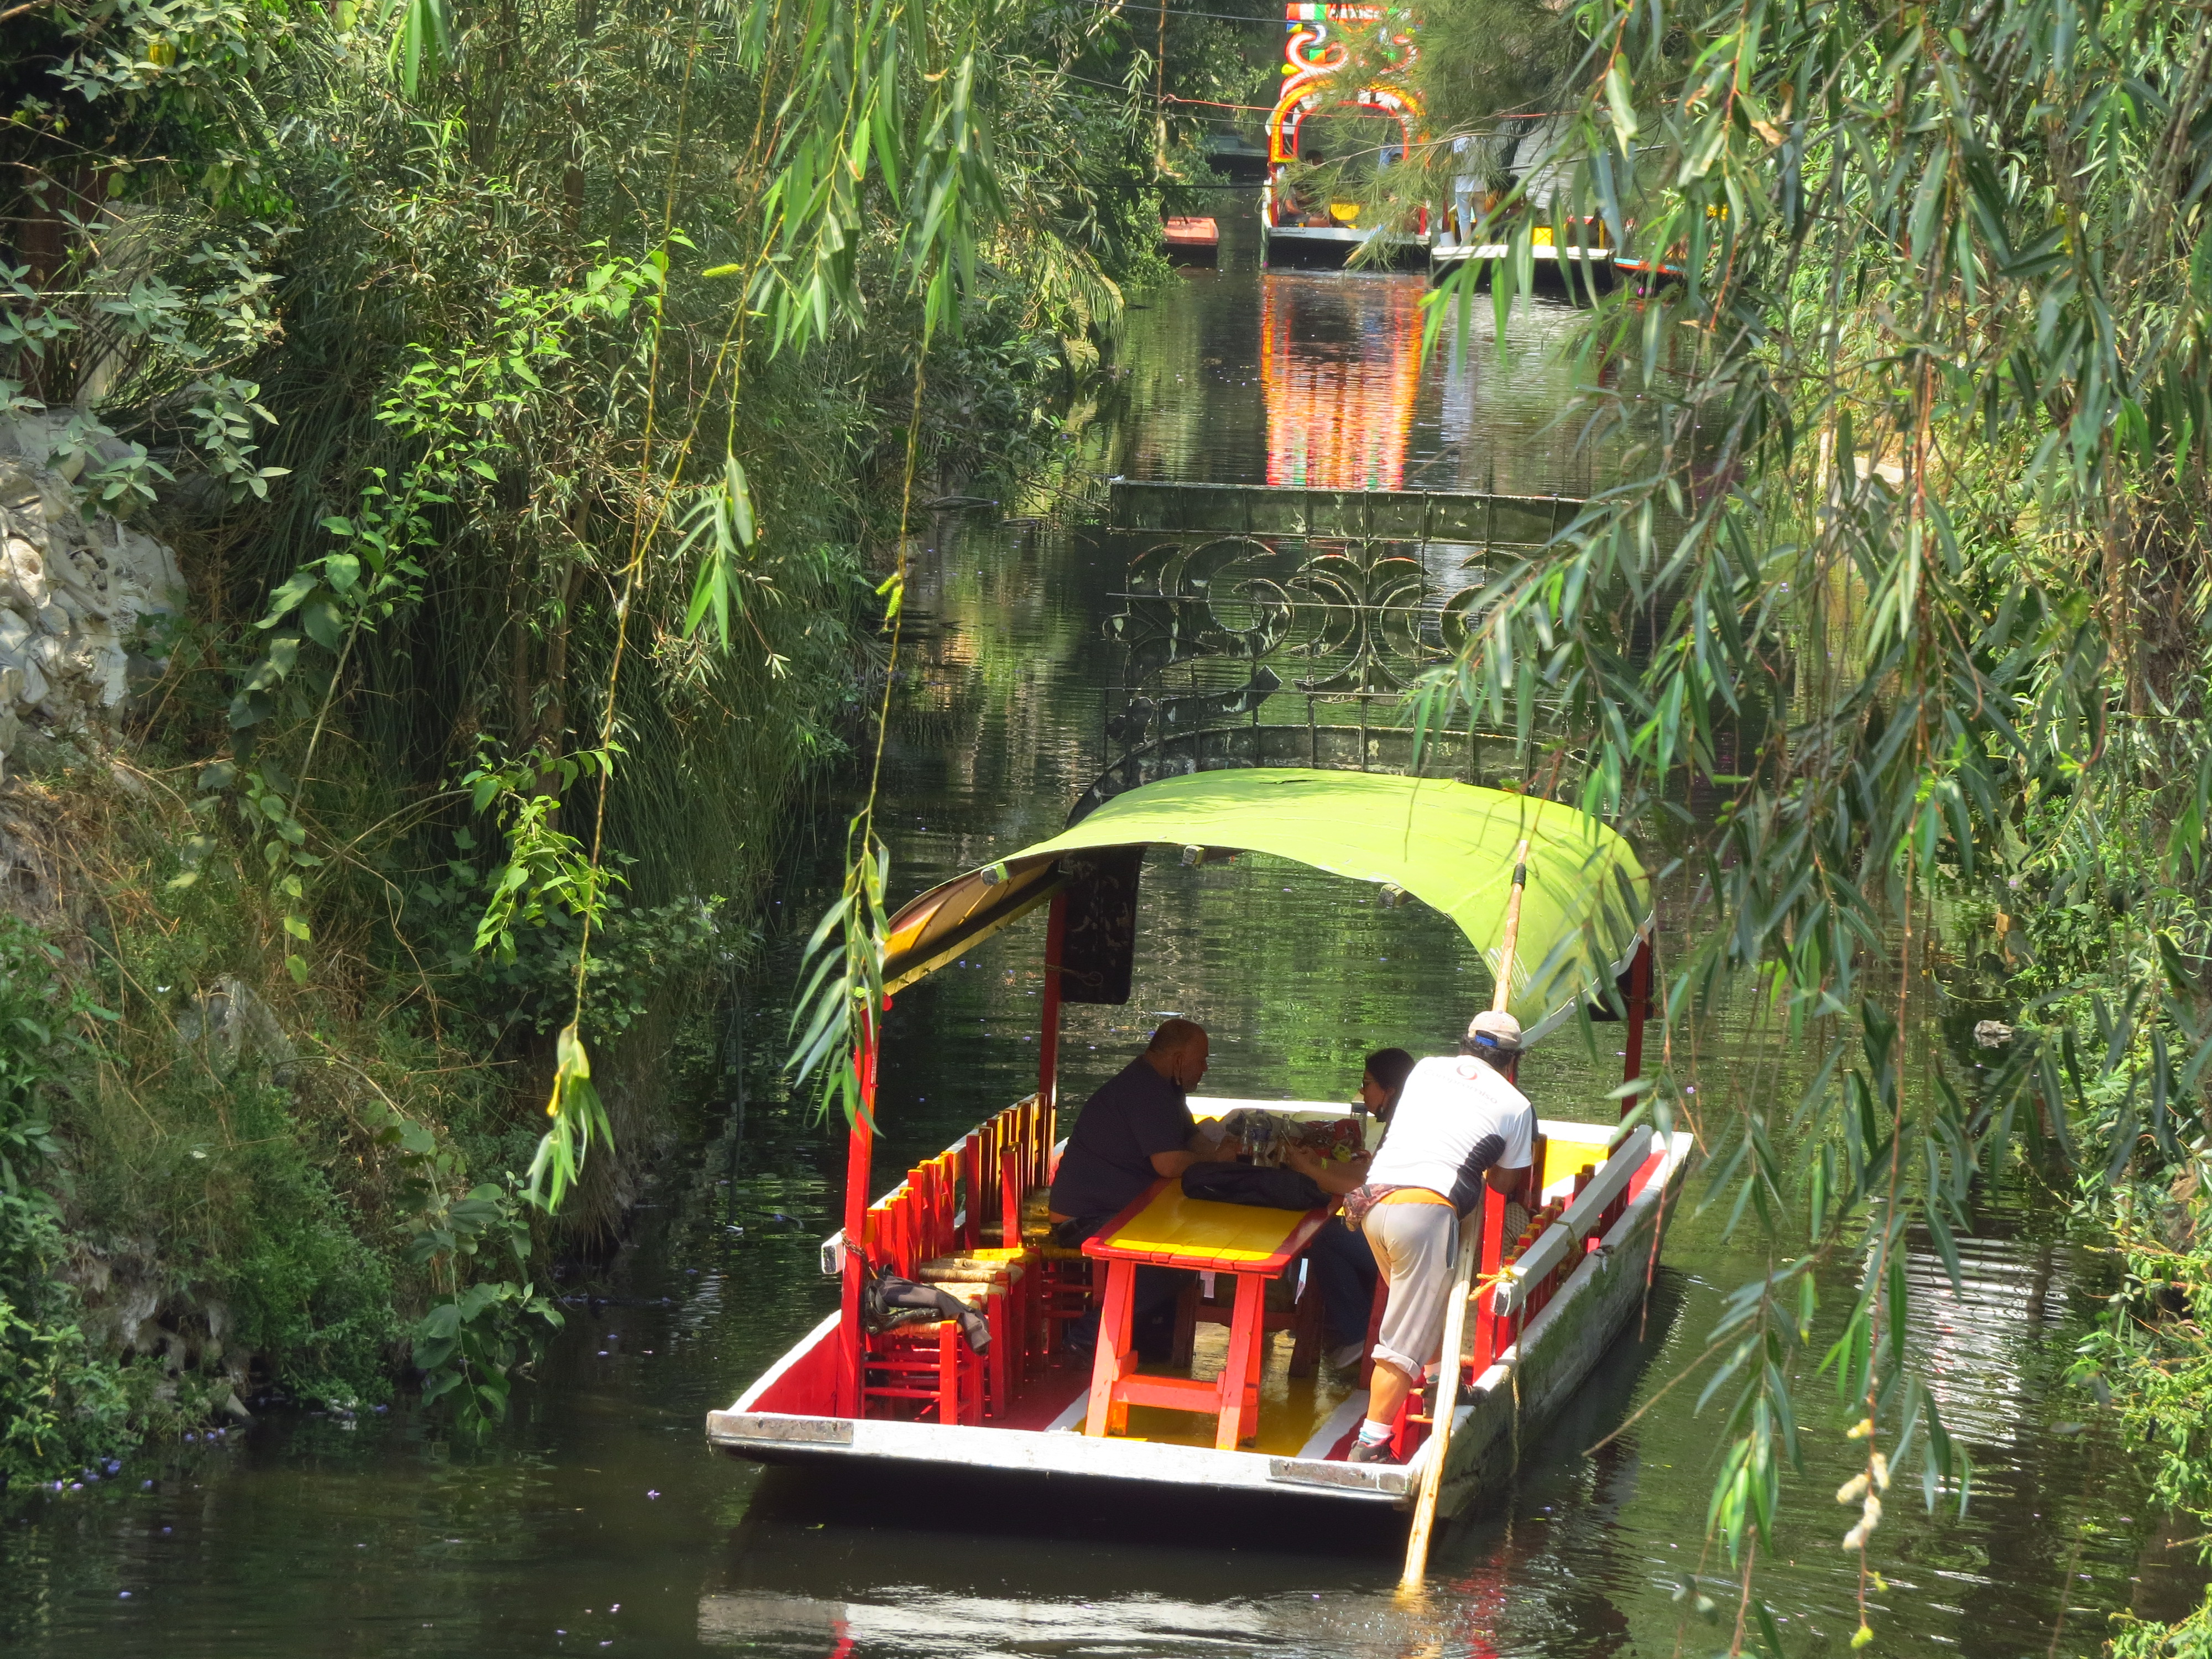 The canals of Xochimilco